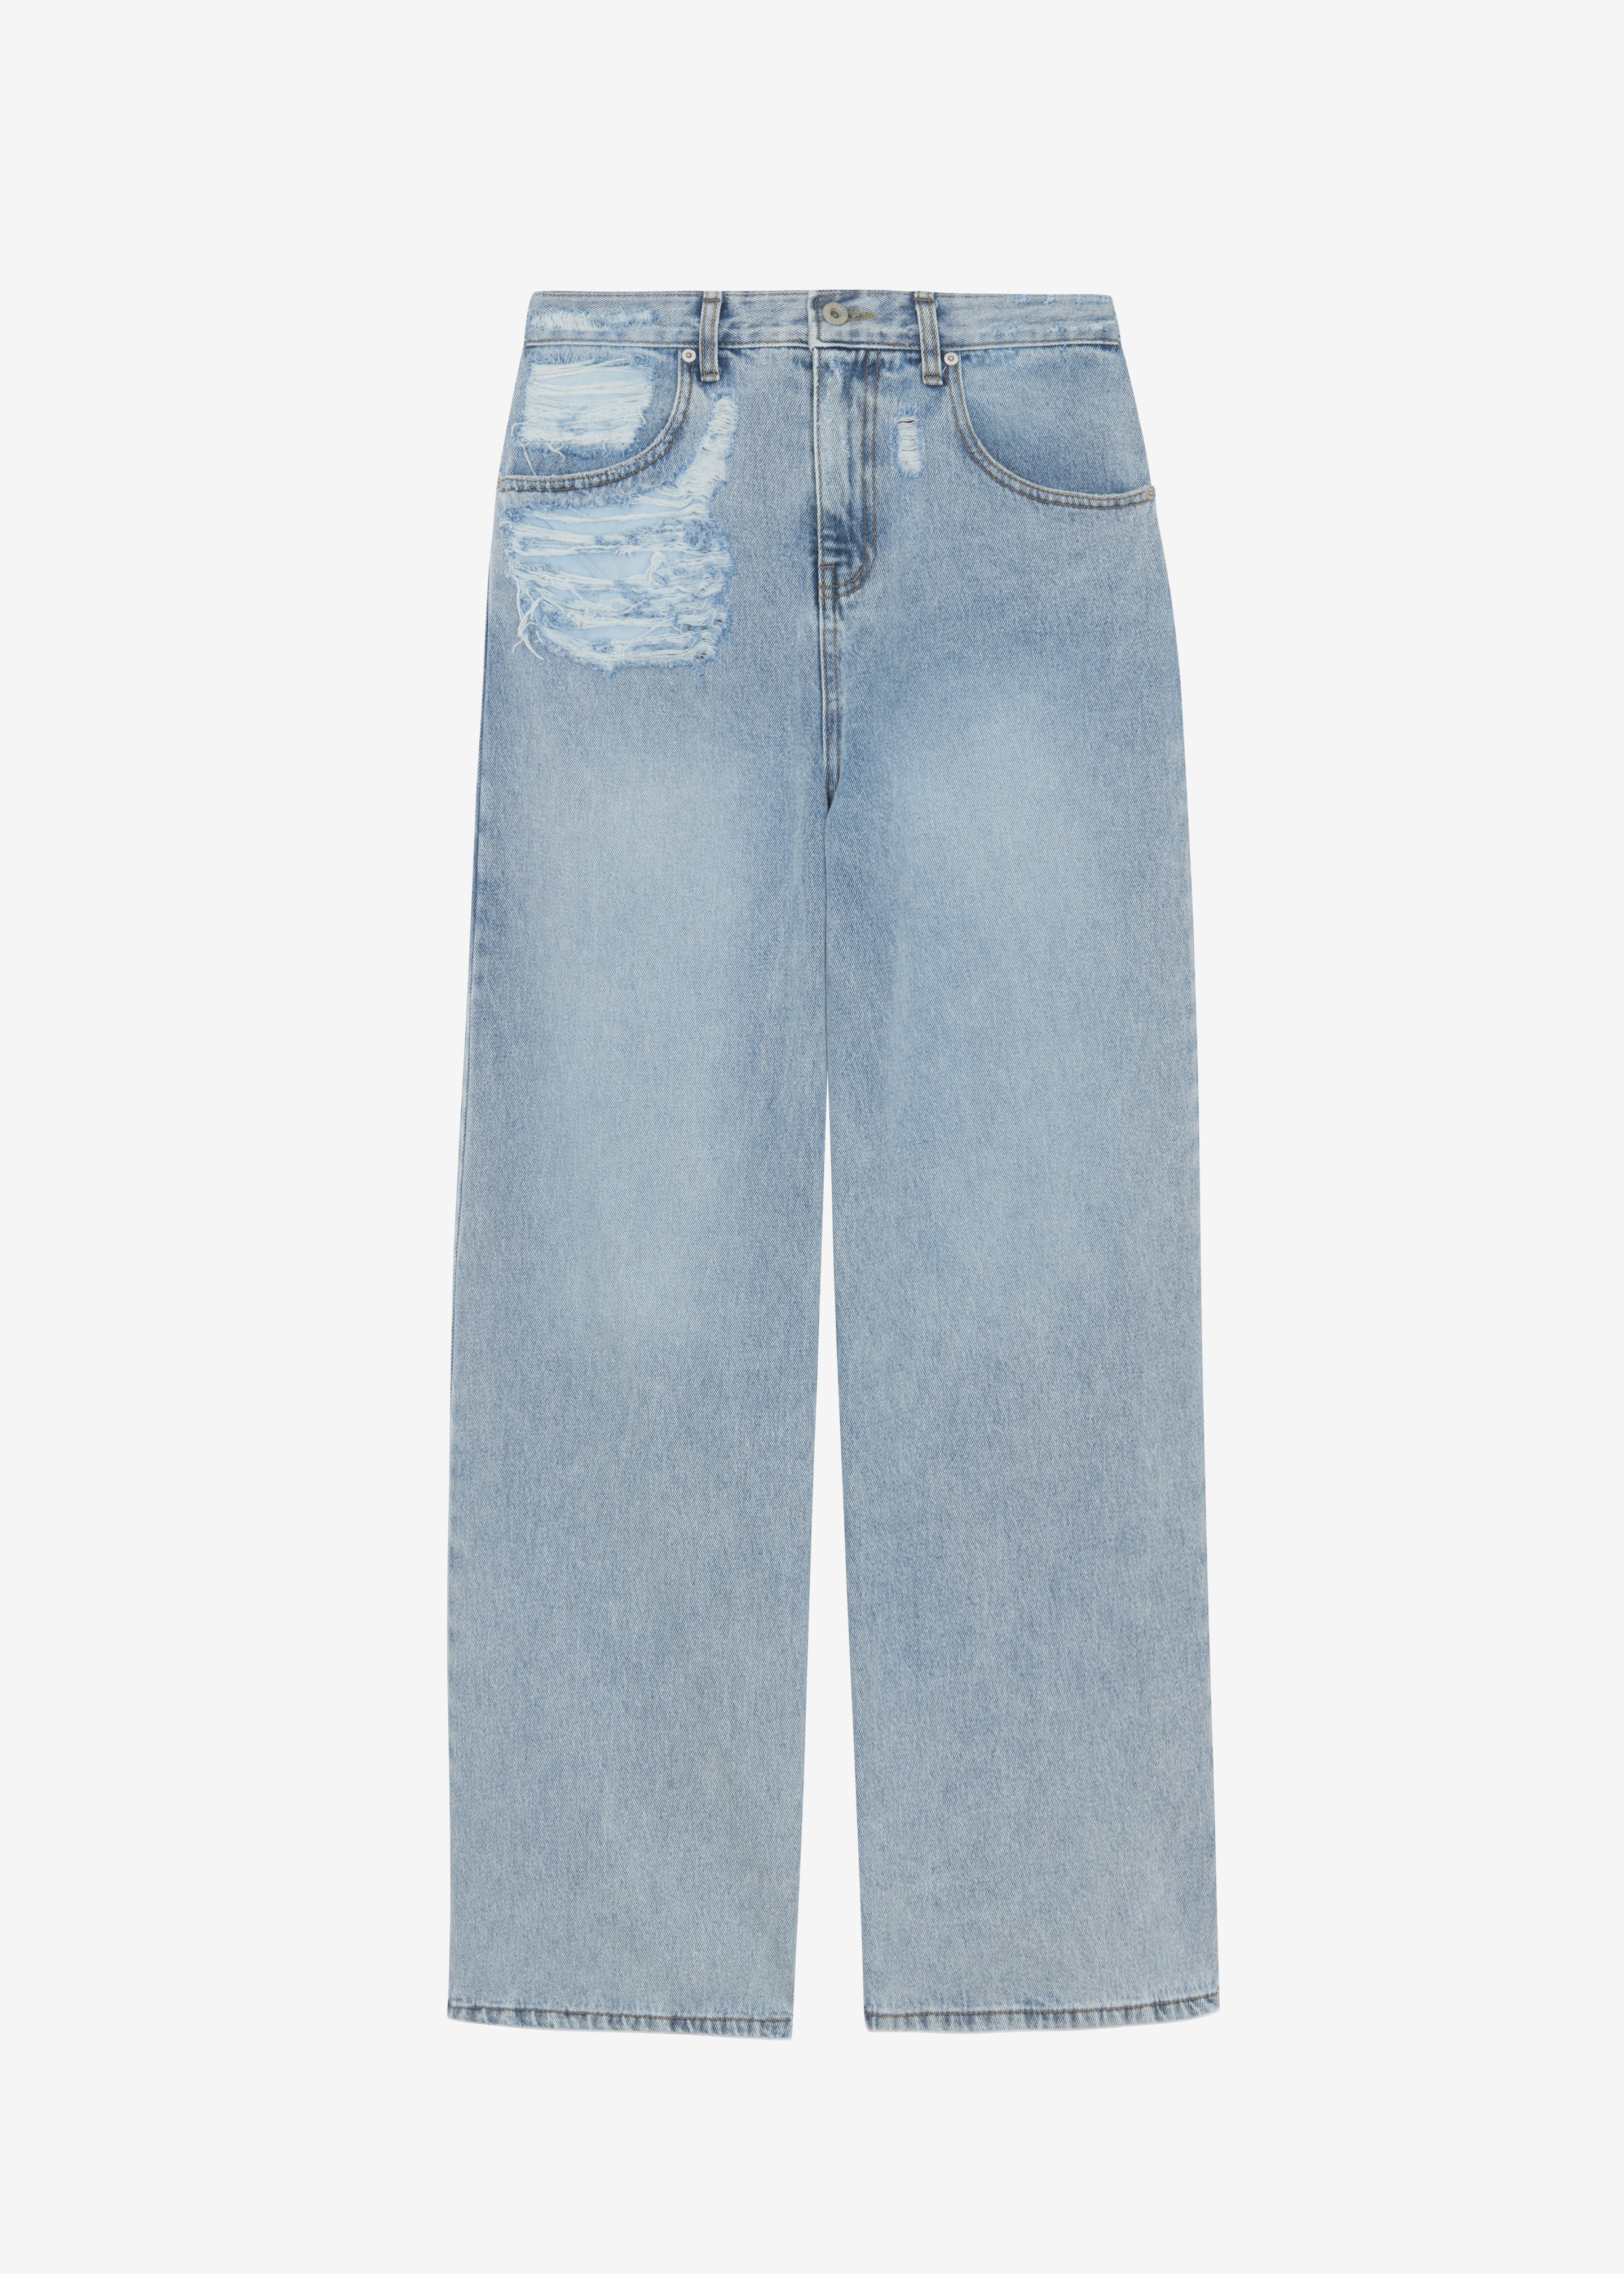 Ceres Ripped Jeans - Worn Wash - 9